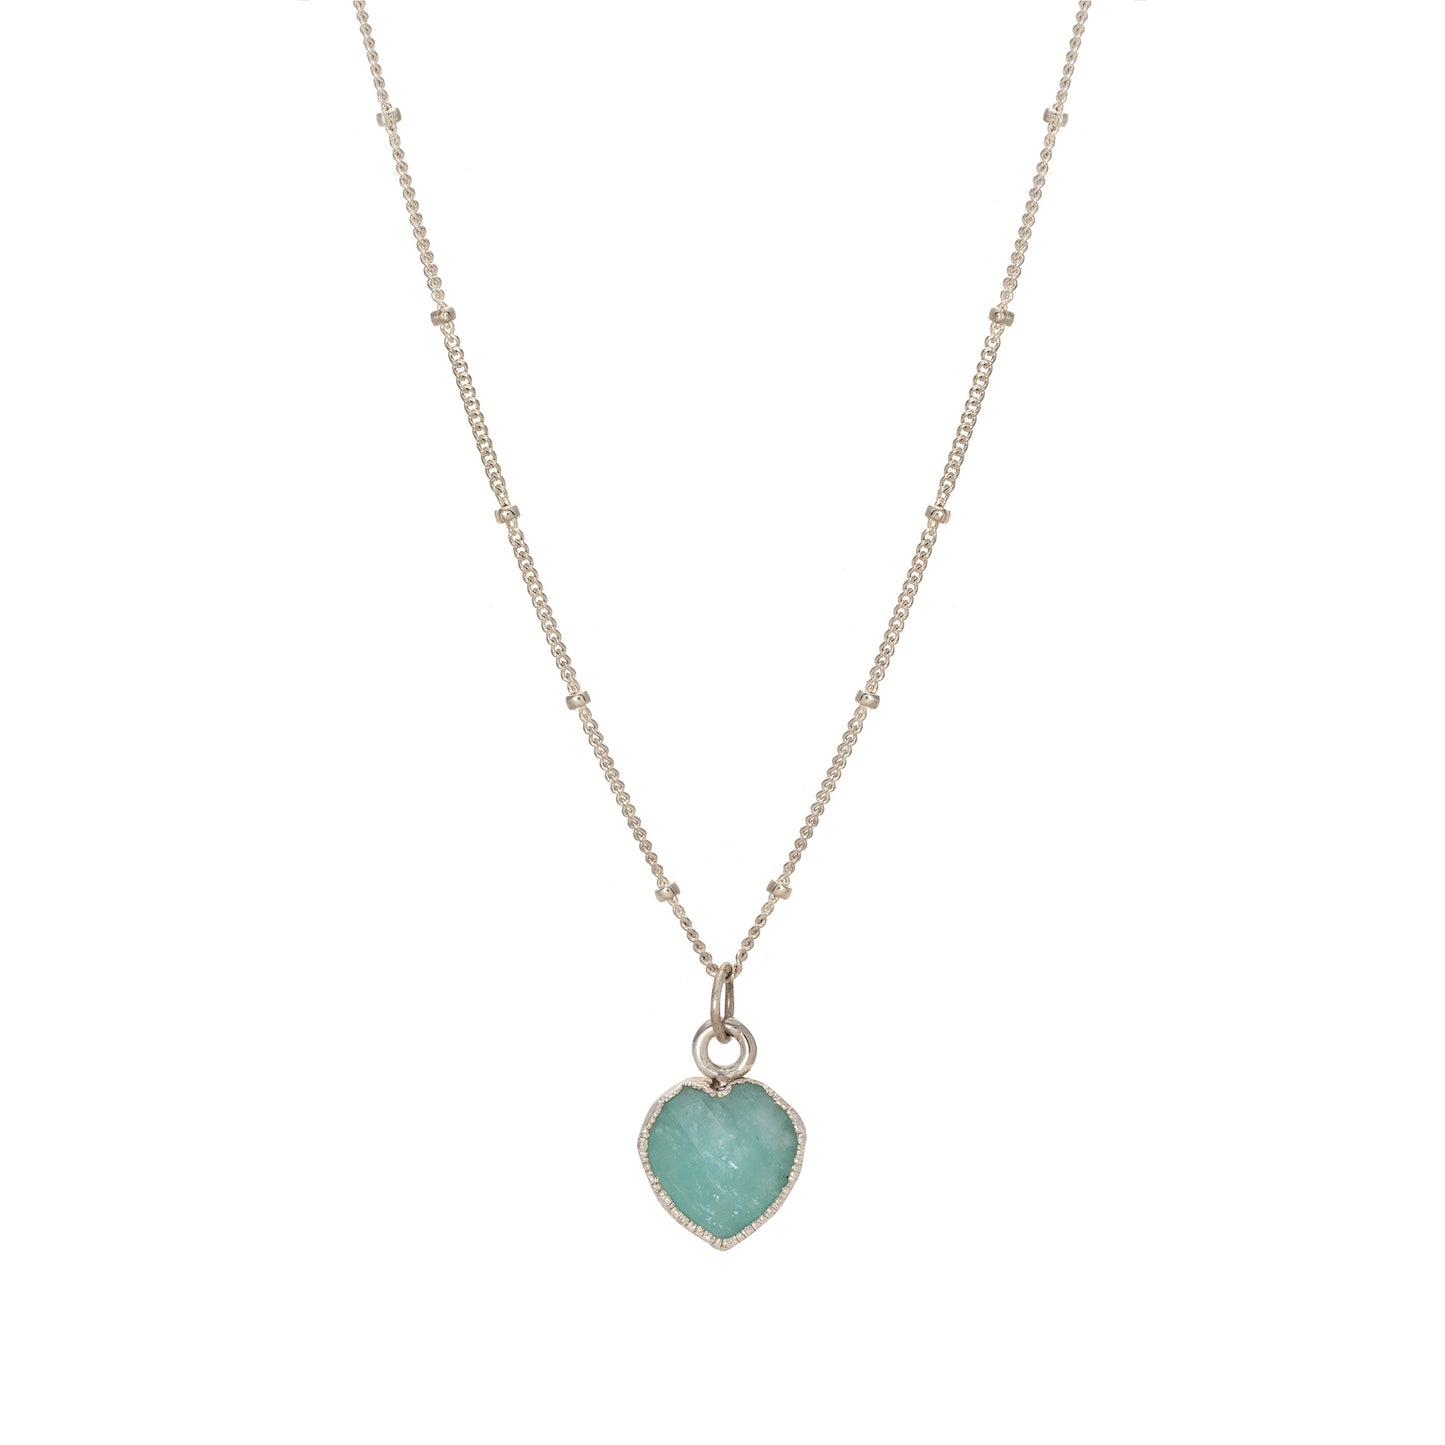 The **Heart Charm Necklace** by **Made Here with Love** features a thin sterling silver chain adorned with tiny beads. The pendant is a small, heart-shaped turquoise stone encased in a gold setting. The design is simple yet elegant, perfect for a subtle touch of color and charm.